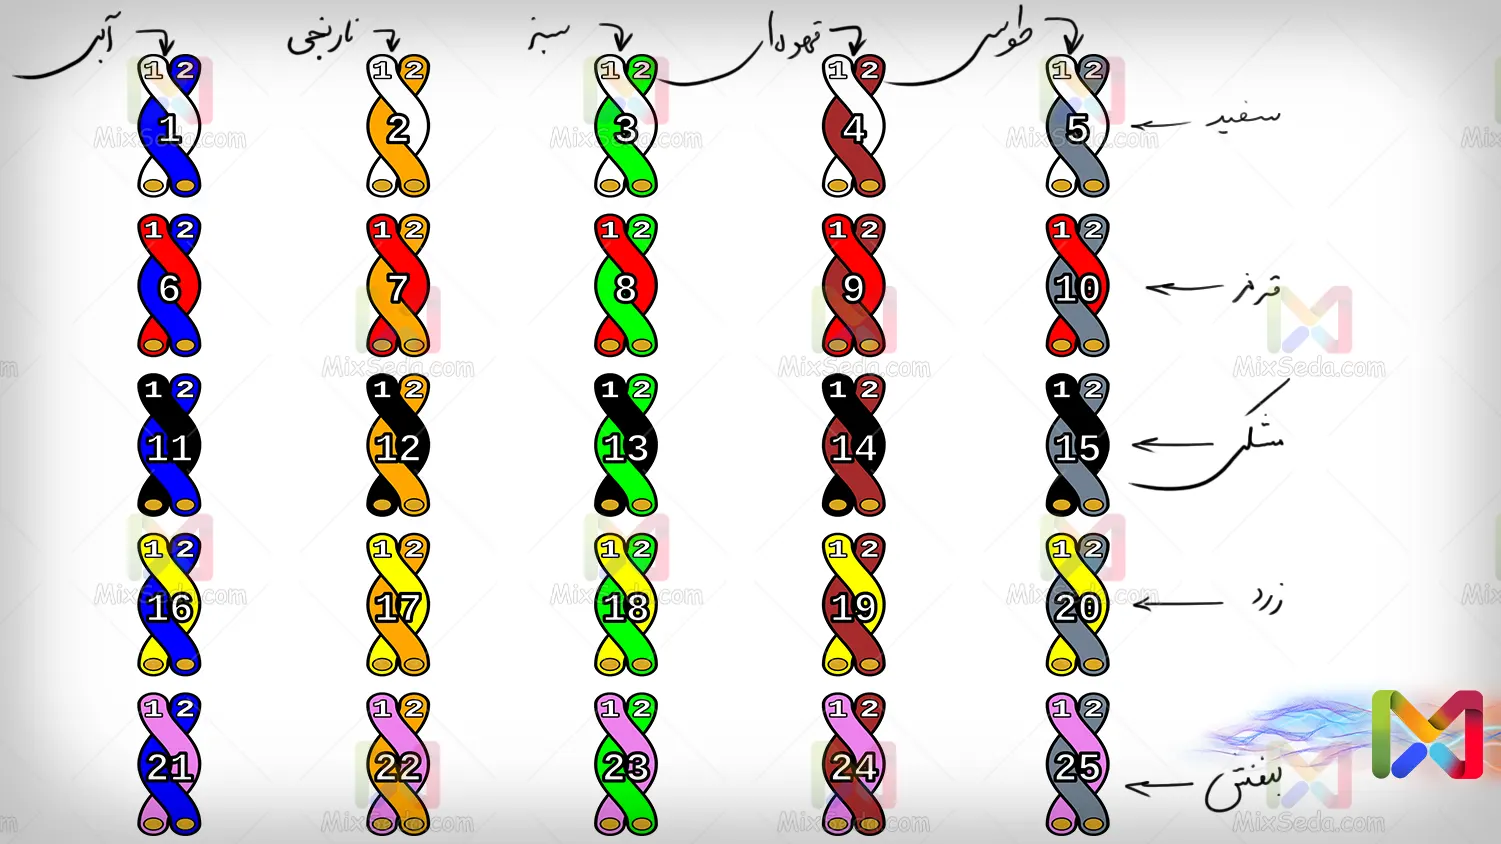 Color combination of twisted-pair cables